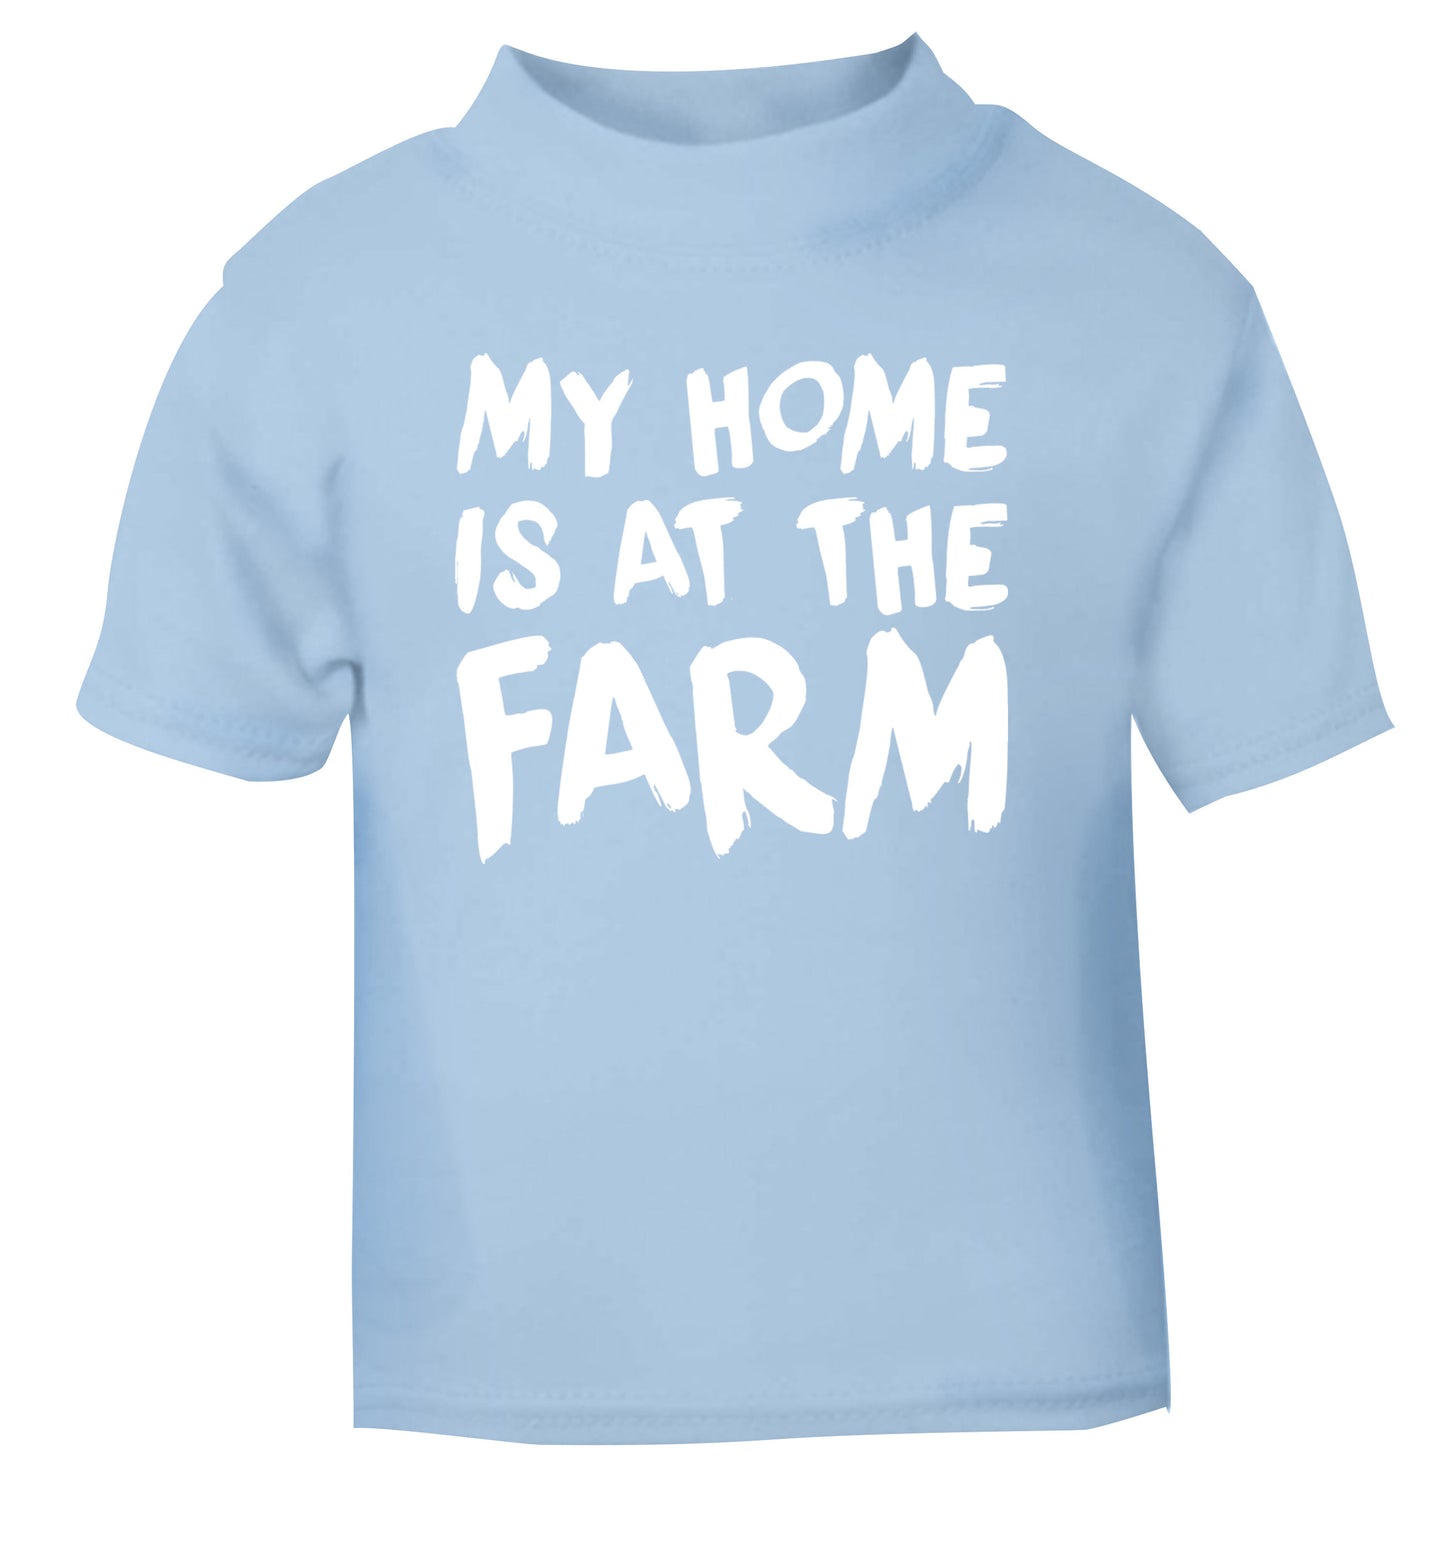 My home is at the farm light blue Baby Toddler Tshirt 2 Years